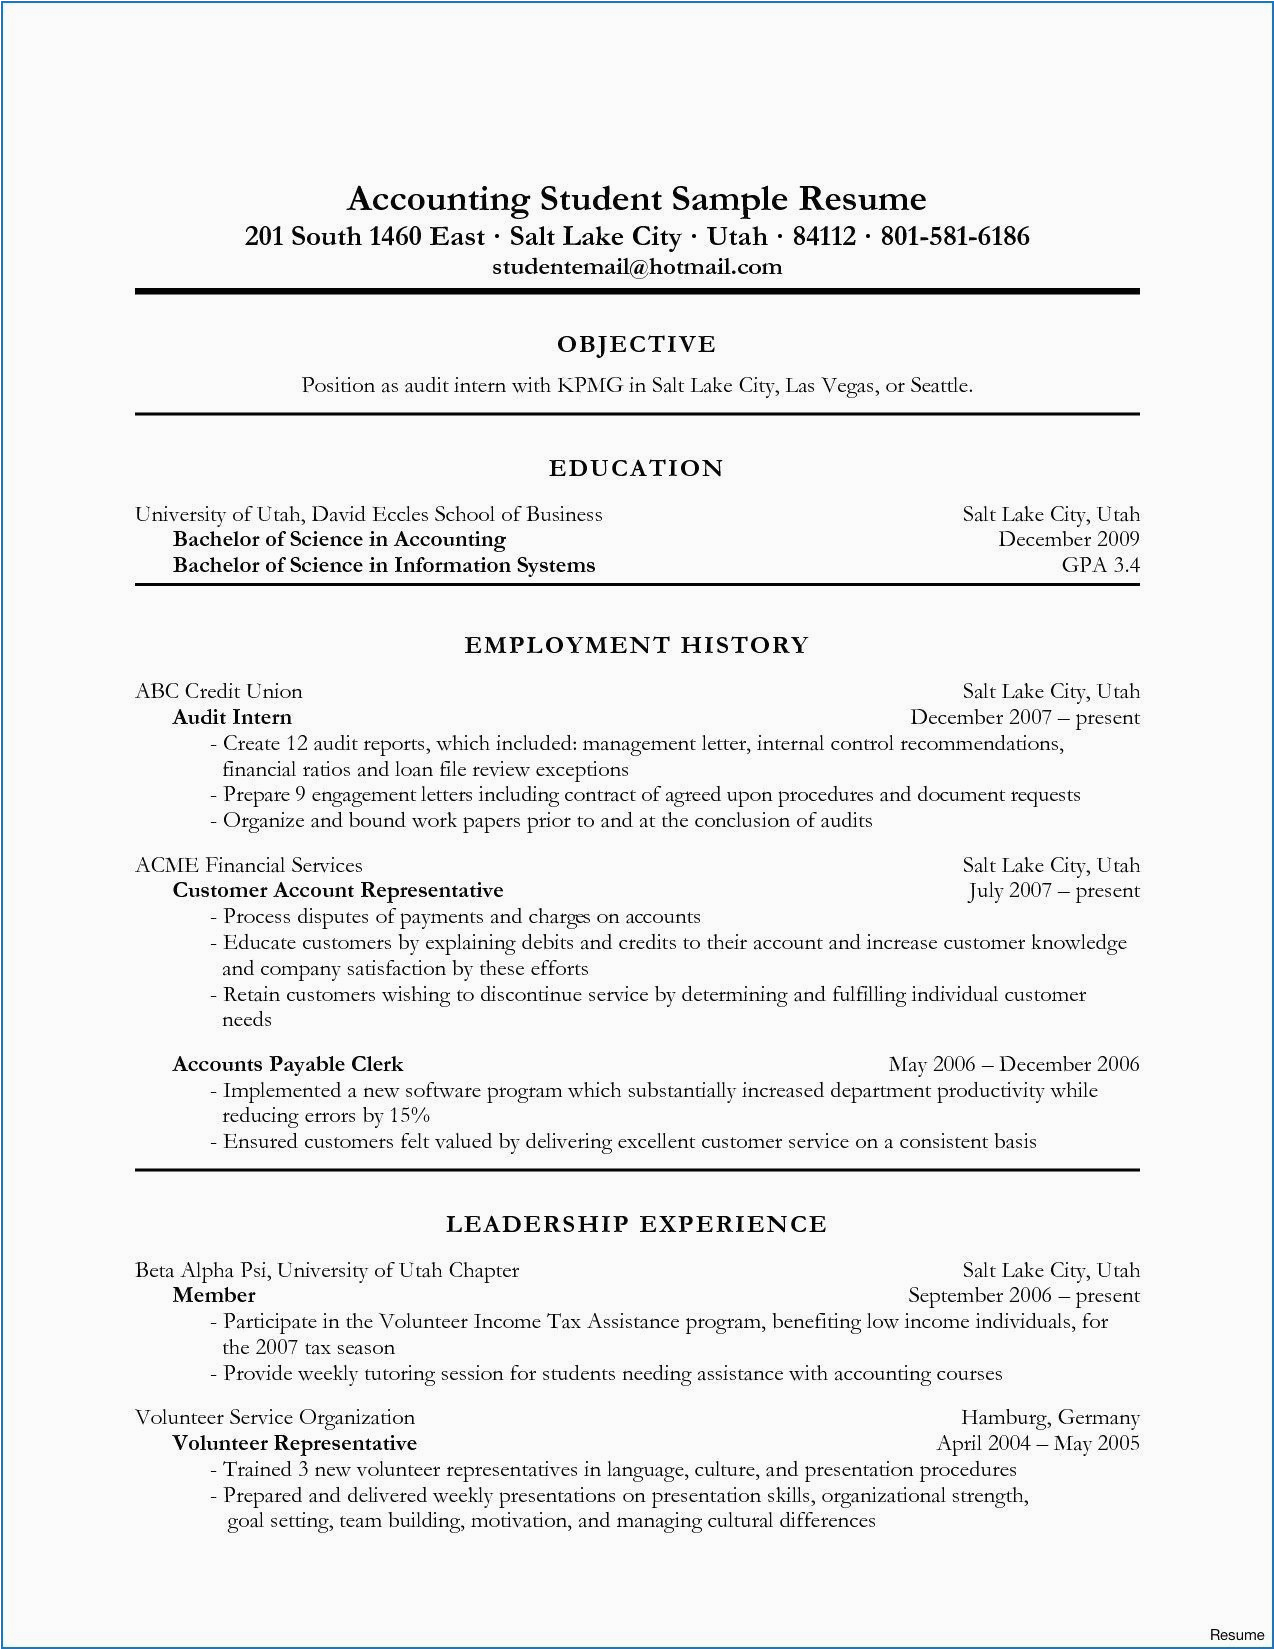 Accounting Resume Samples for Fresh Graduates Resume for Fresh Graduate Accounting Student Best Resume Examples